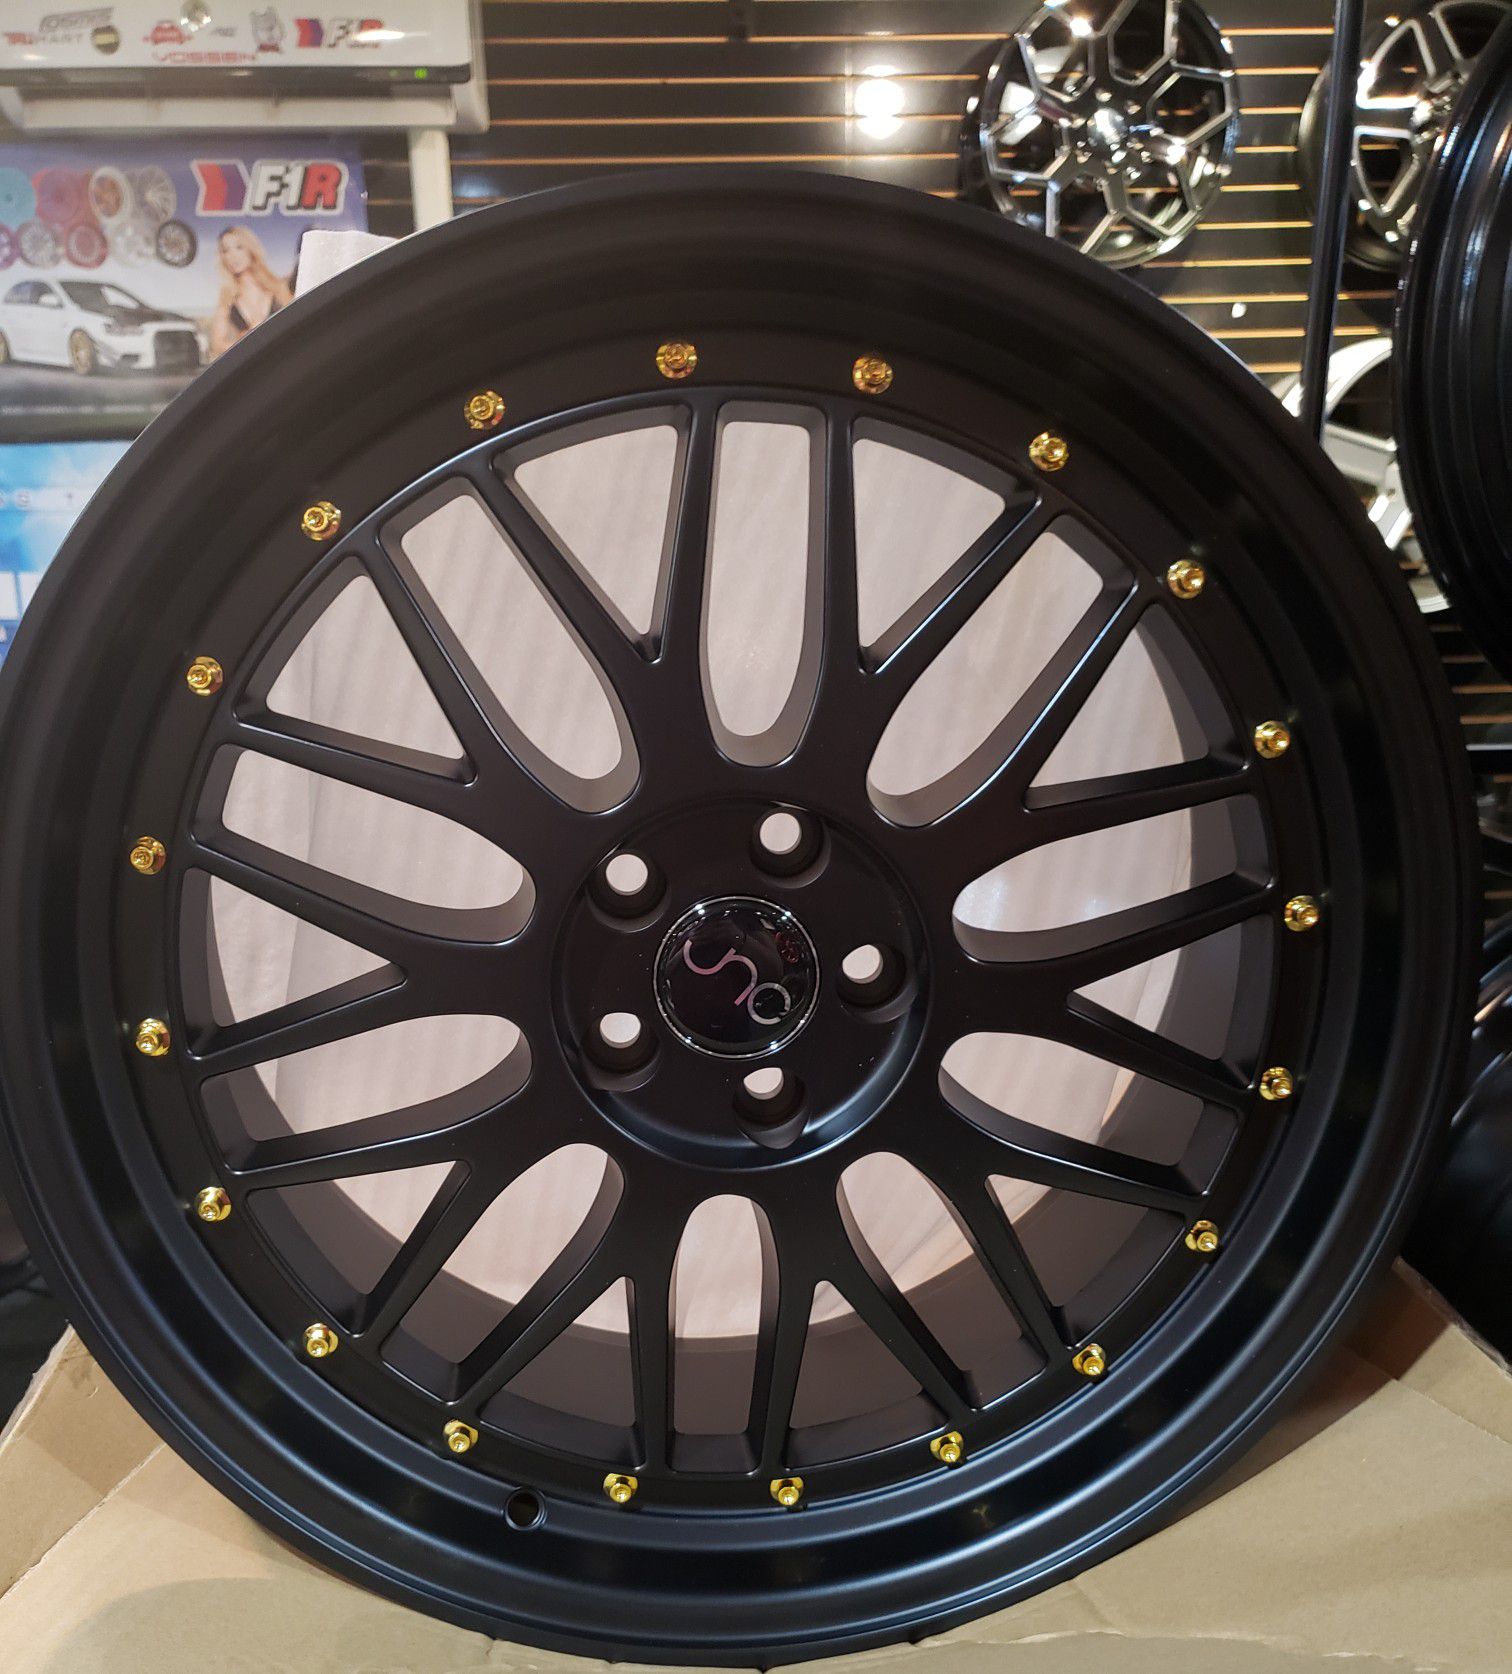 JNC rims on stock 5x112 5x114 5x120 5x100 financing available (no credit needed)